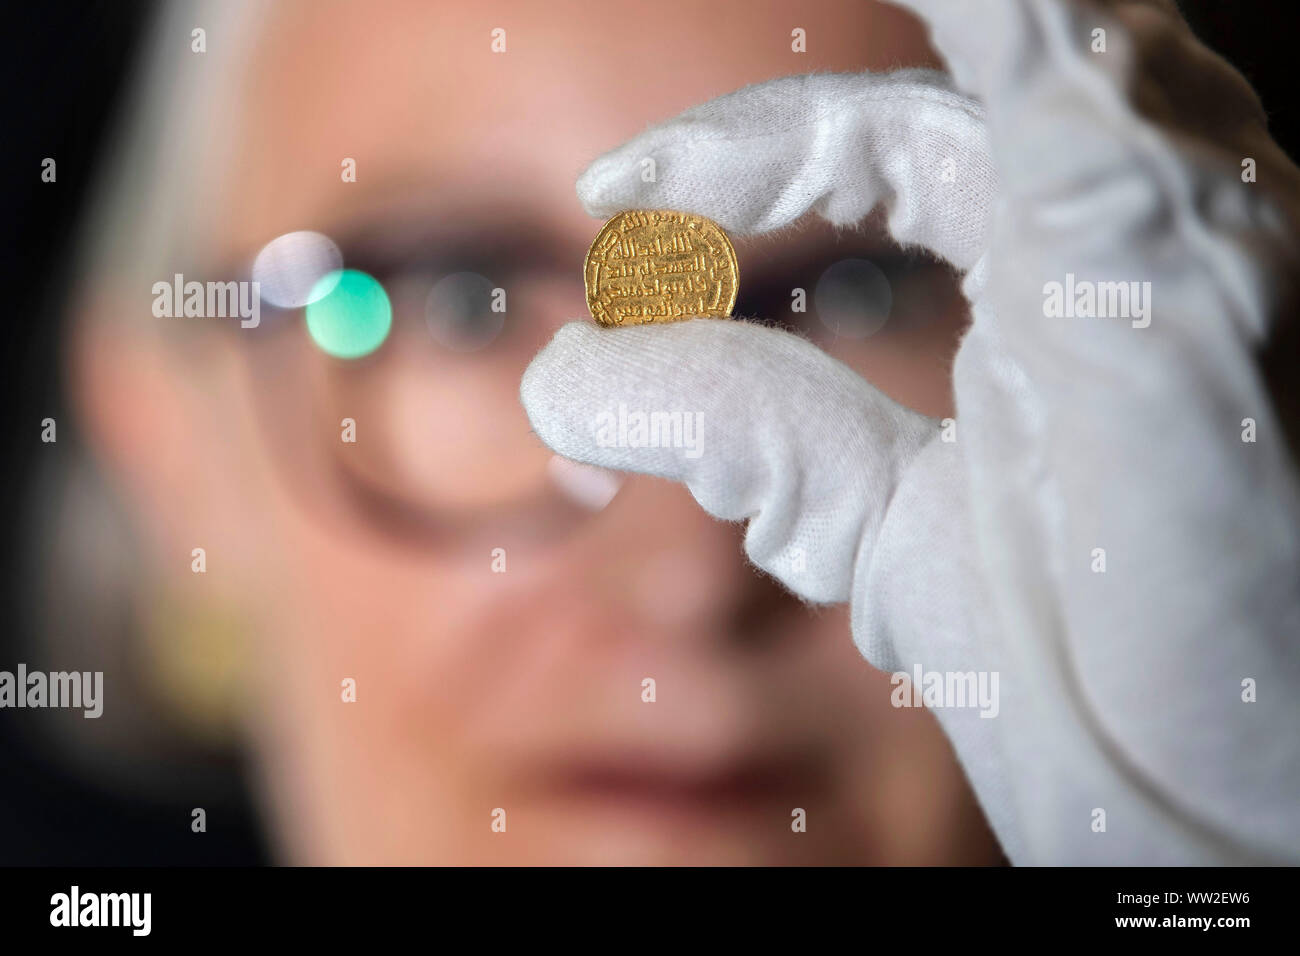 A member of staff at Morton & Eden holds an extremely rare early Islamic gold coin which is expected to fetch £1.4m at auction in London. PA Photo. Picture date: Thursday September 12, 2019. Measuring a 20mm across, about the size of a modern £1 piece, it is one of the world's rarest and most treasured Islamic gold coins from the first dynasty of Islam, the Umayyad gold dinar dated 105h (723AD). Photo credit should read: Victoria Jones/PA Wire Stock Photo